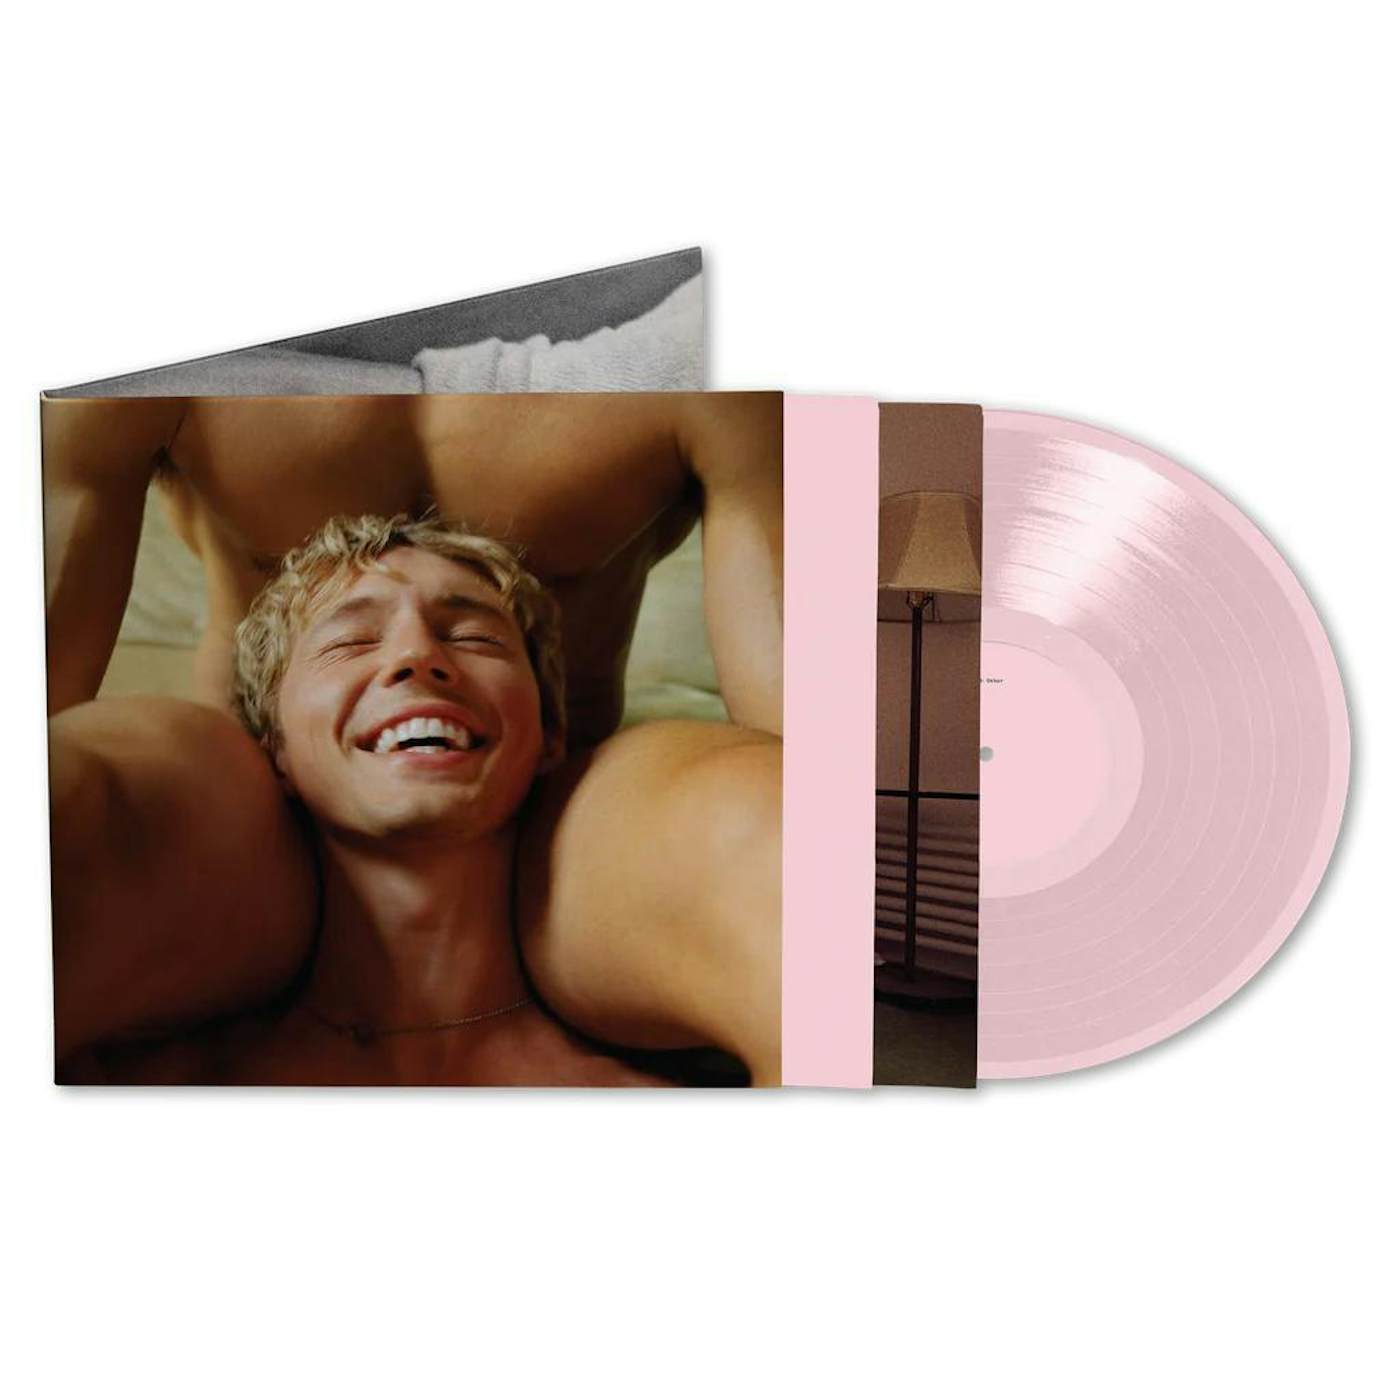 Troye Sivan Something To Give Each Other (Exclusive Deluxe Gatefold Pink) Vinyl Record